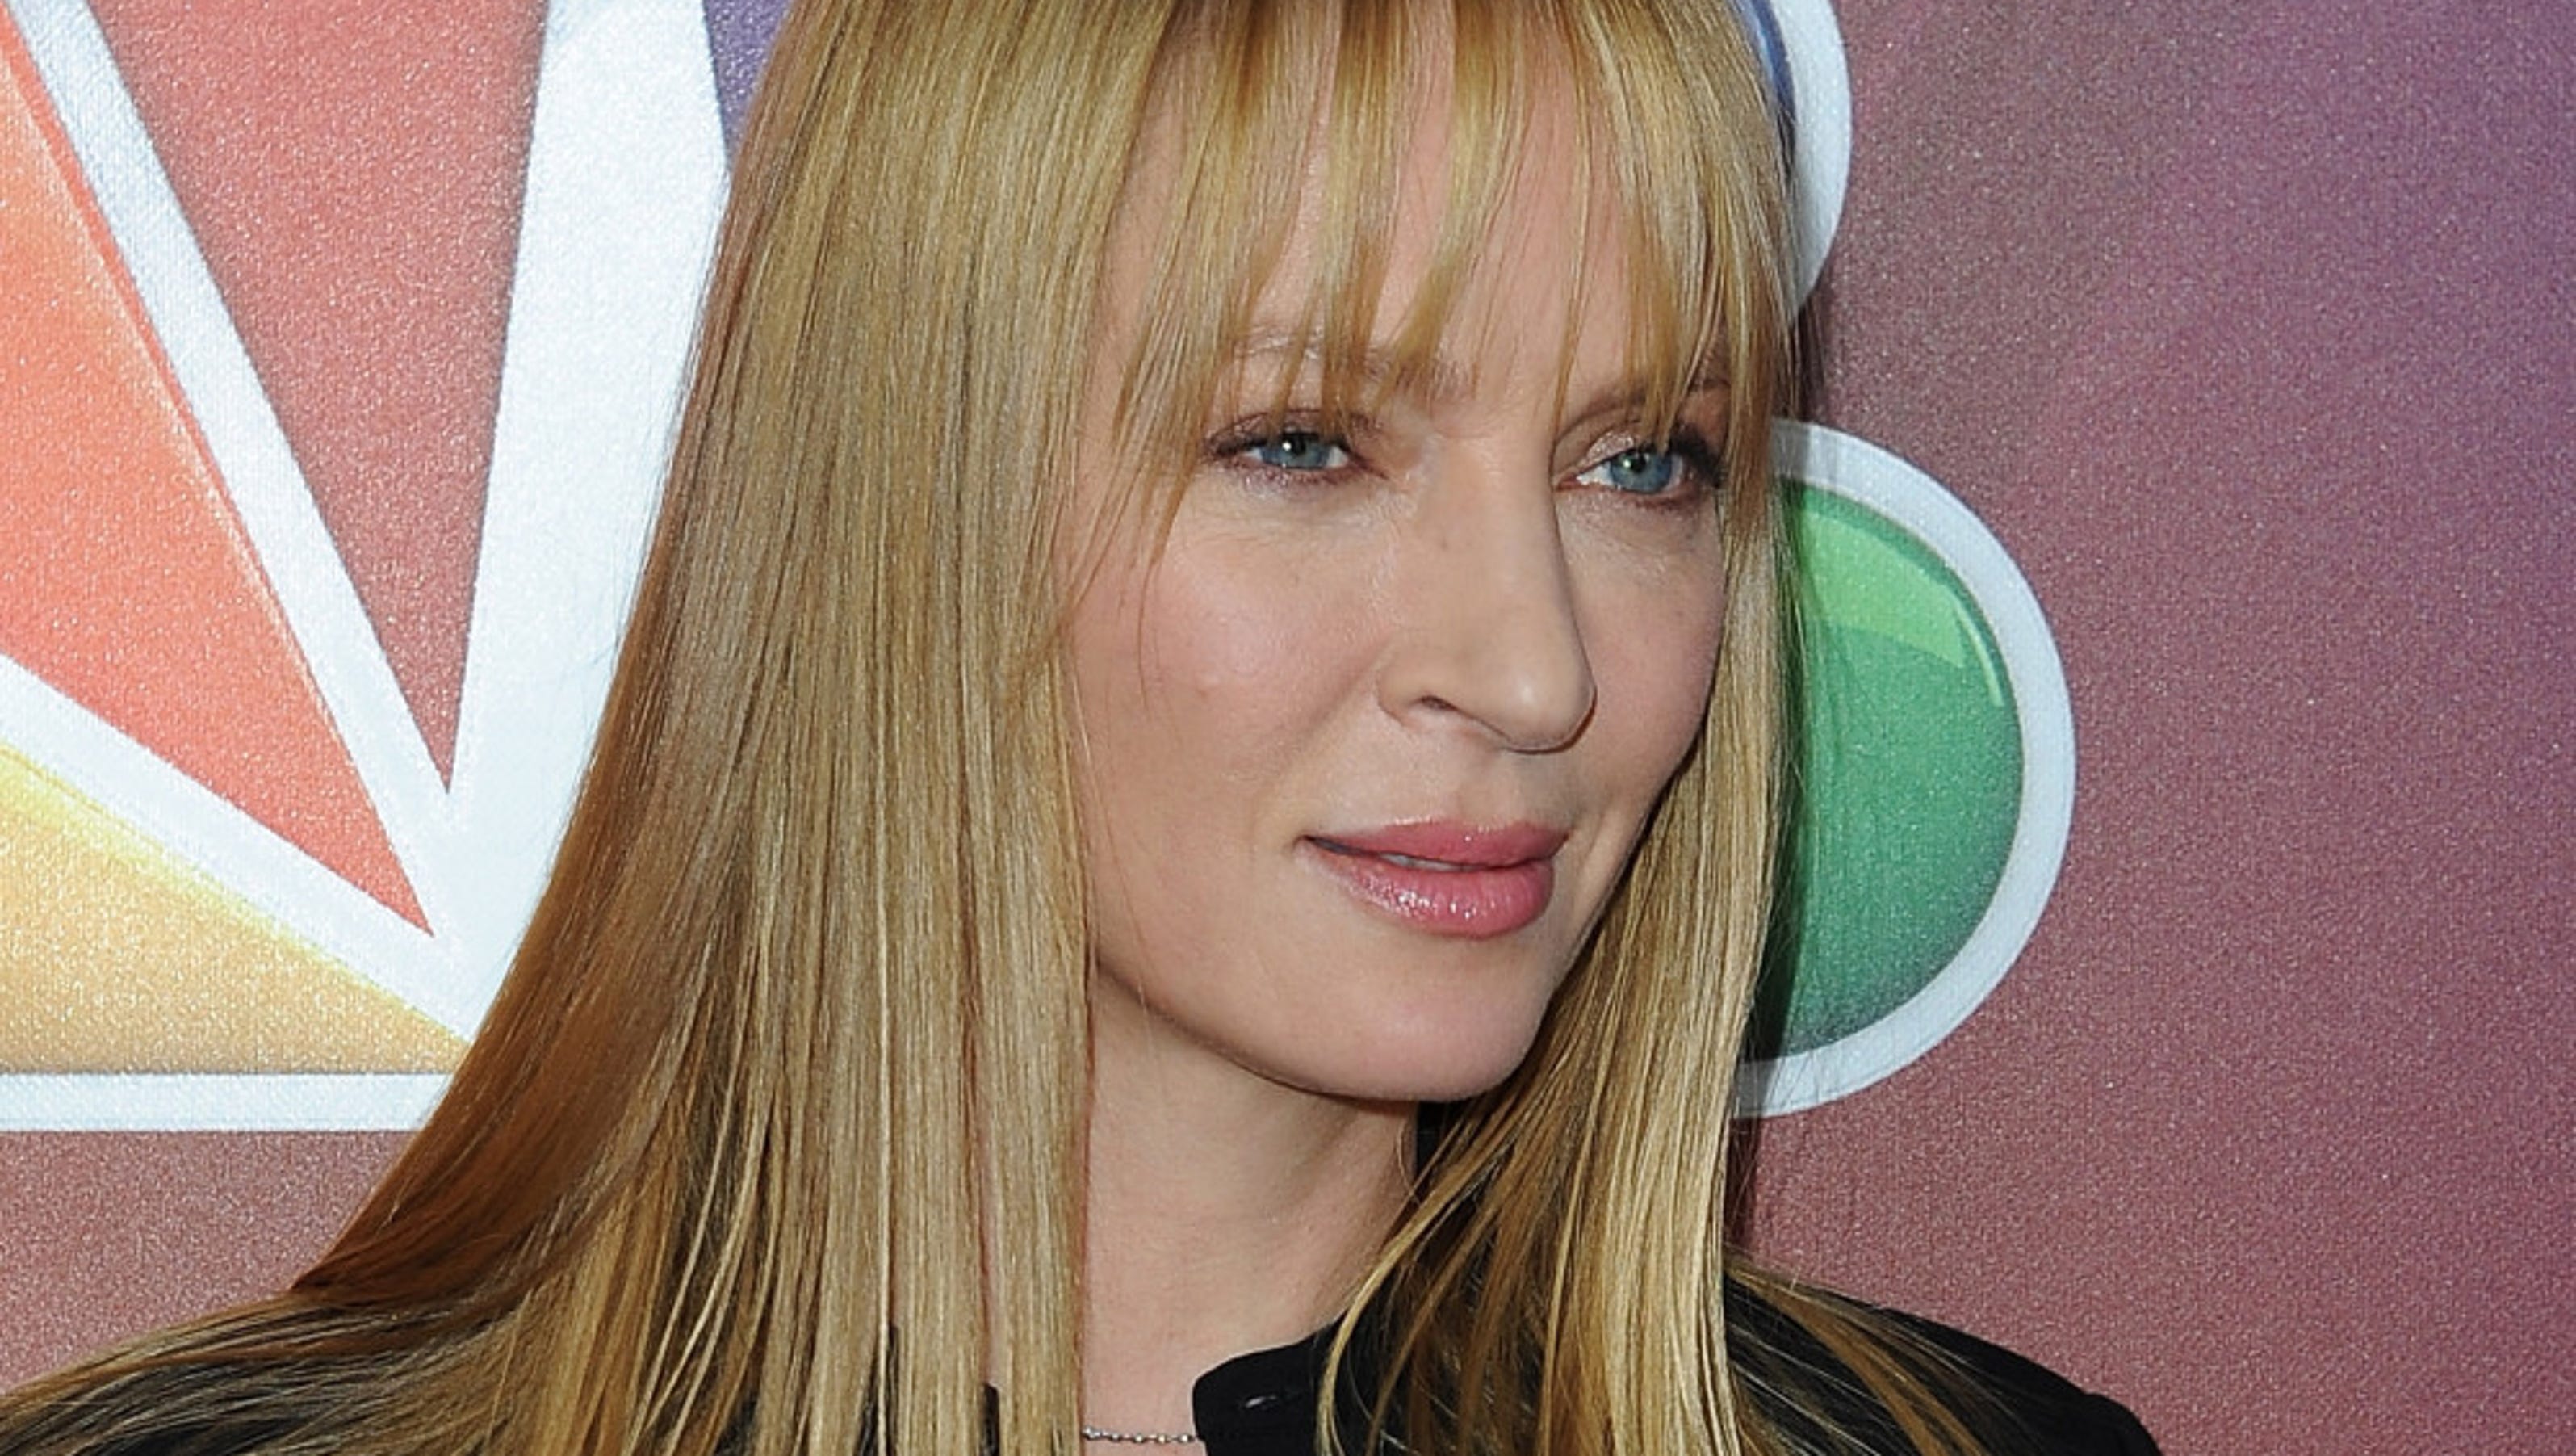 What happened to Uma Thurman's face?3200 x 1800